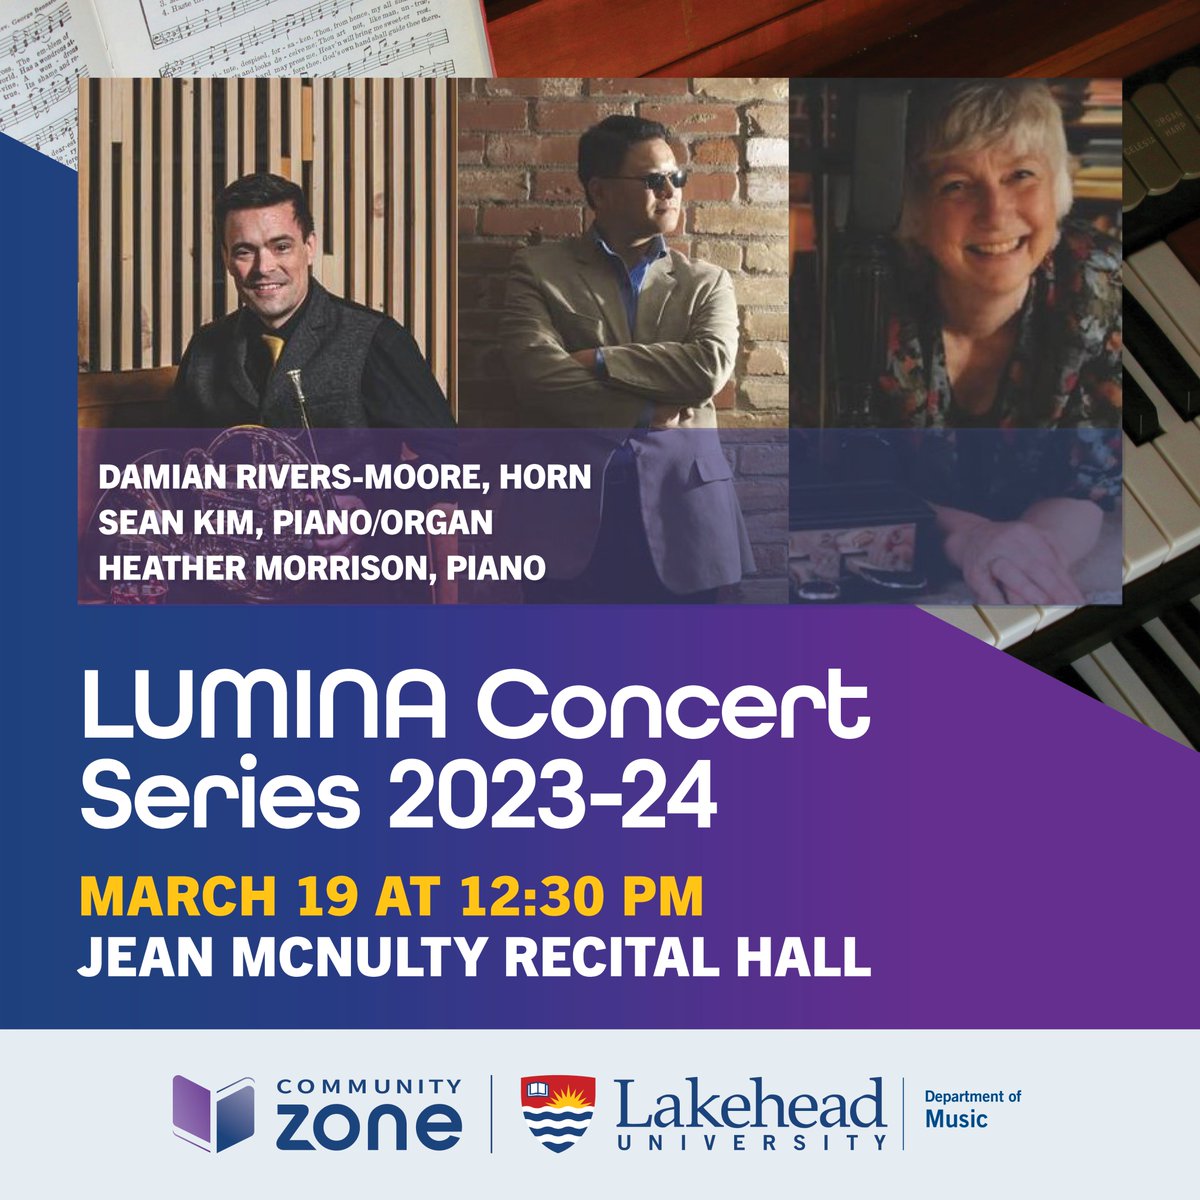 🎹🎺Immerse in a symphony of talent with the LUMINA #concertseries by @mylakehead featuring Damian Rivers-Moore, horn, Sean Kim, piano/organ, & Heather Morrison, piano, on March 19. 🔗 bit.ly/40jhR8T #lakeheaduniversity #classicalmusic #tbaymusicscene #tbayshows #tbay